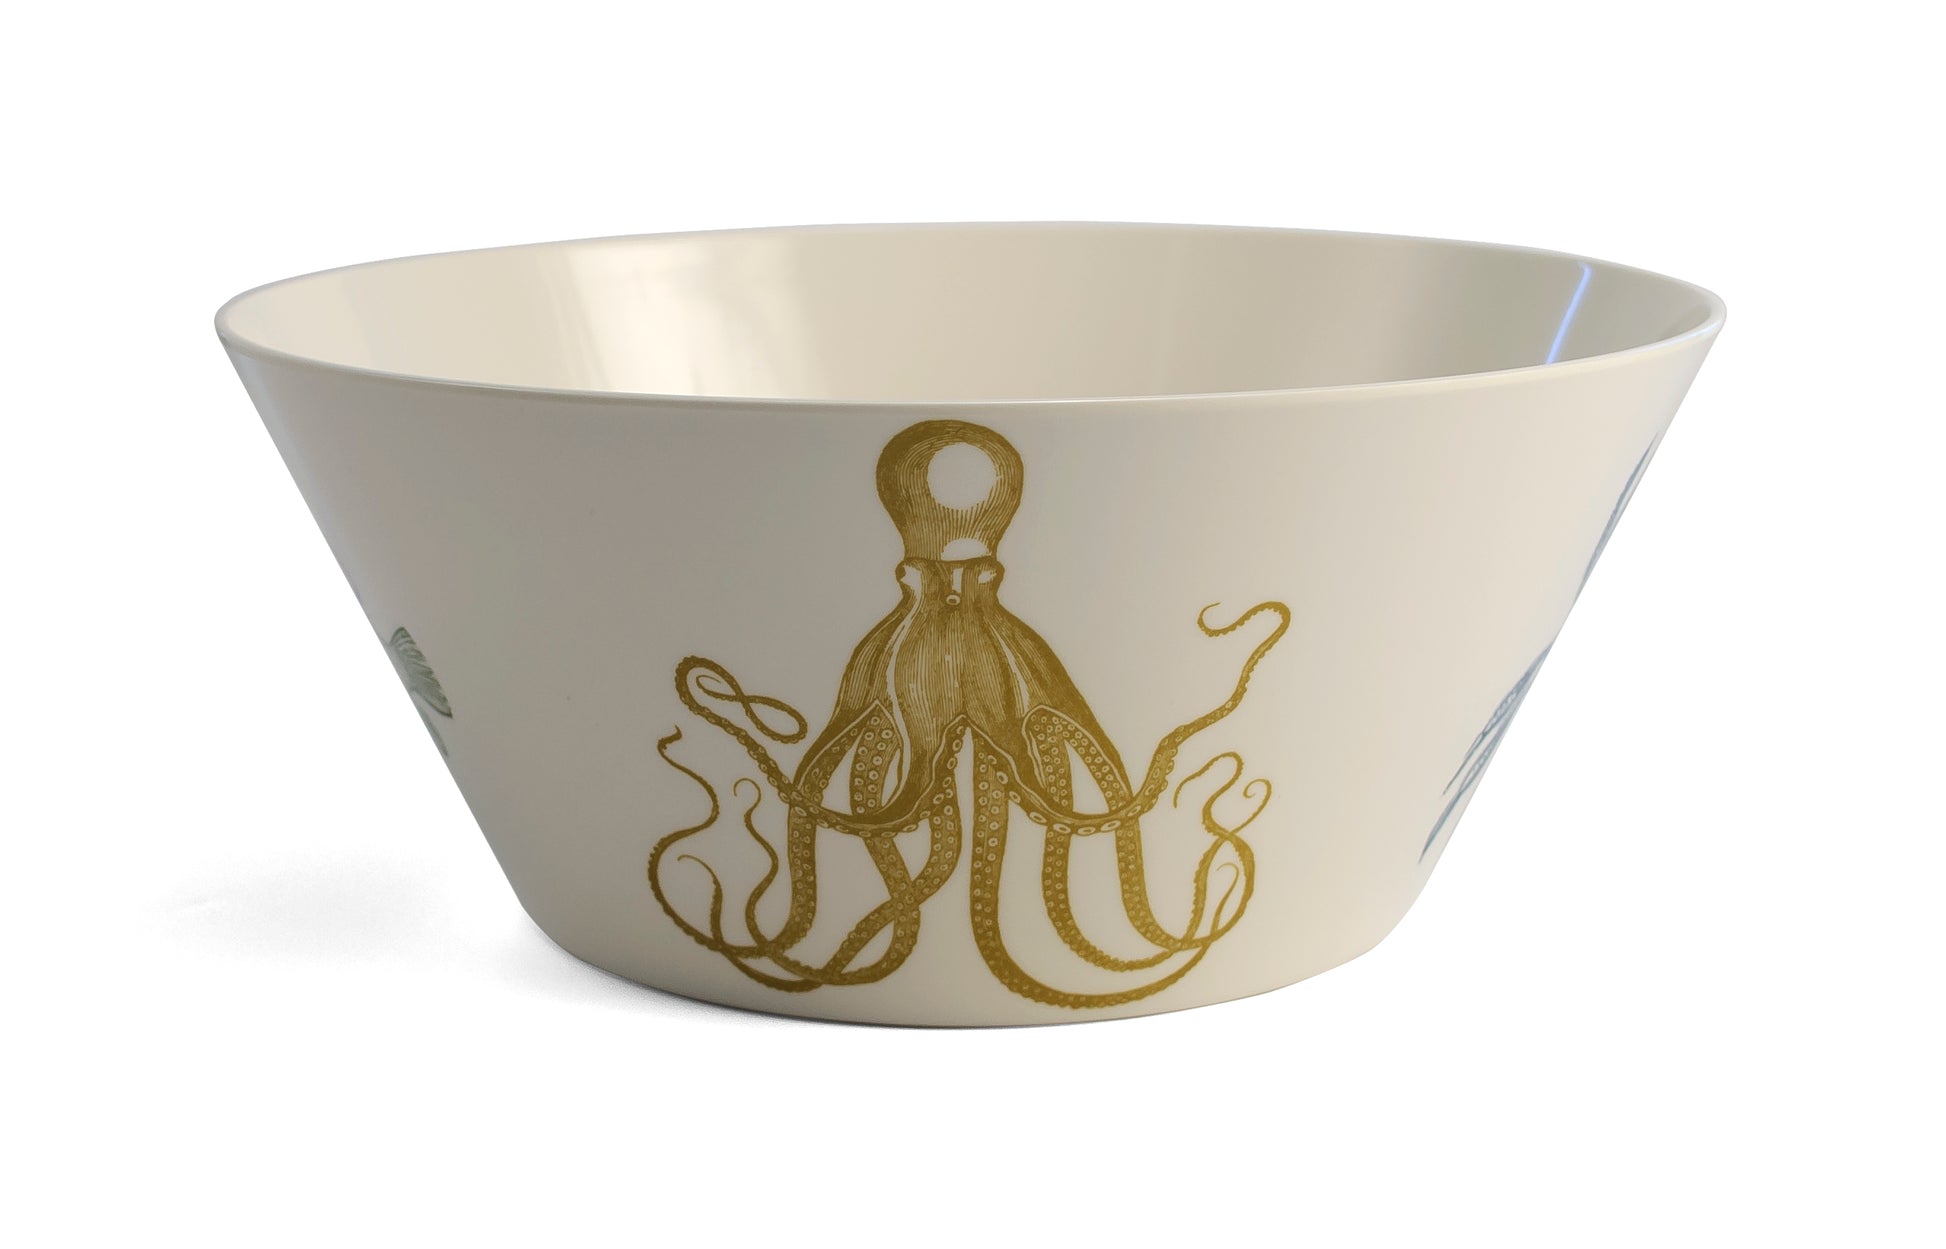 Sealife Serving Bowl - BagLunchproduct,corp